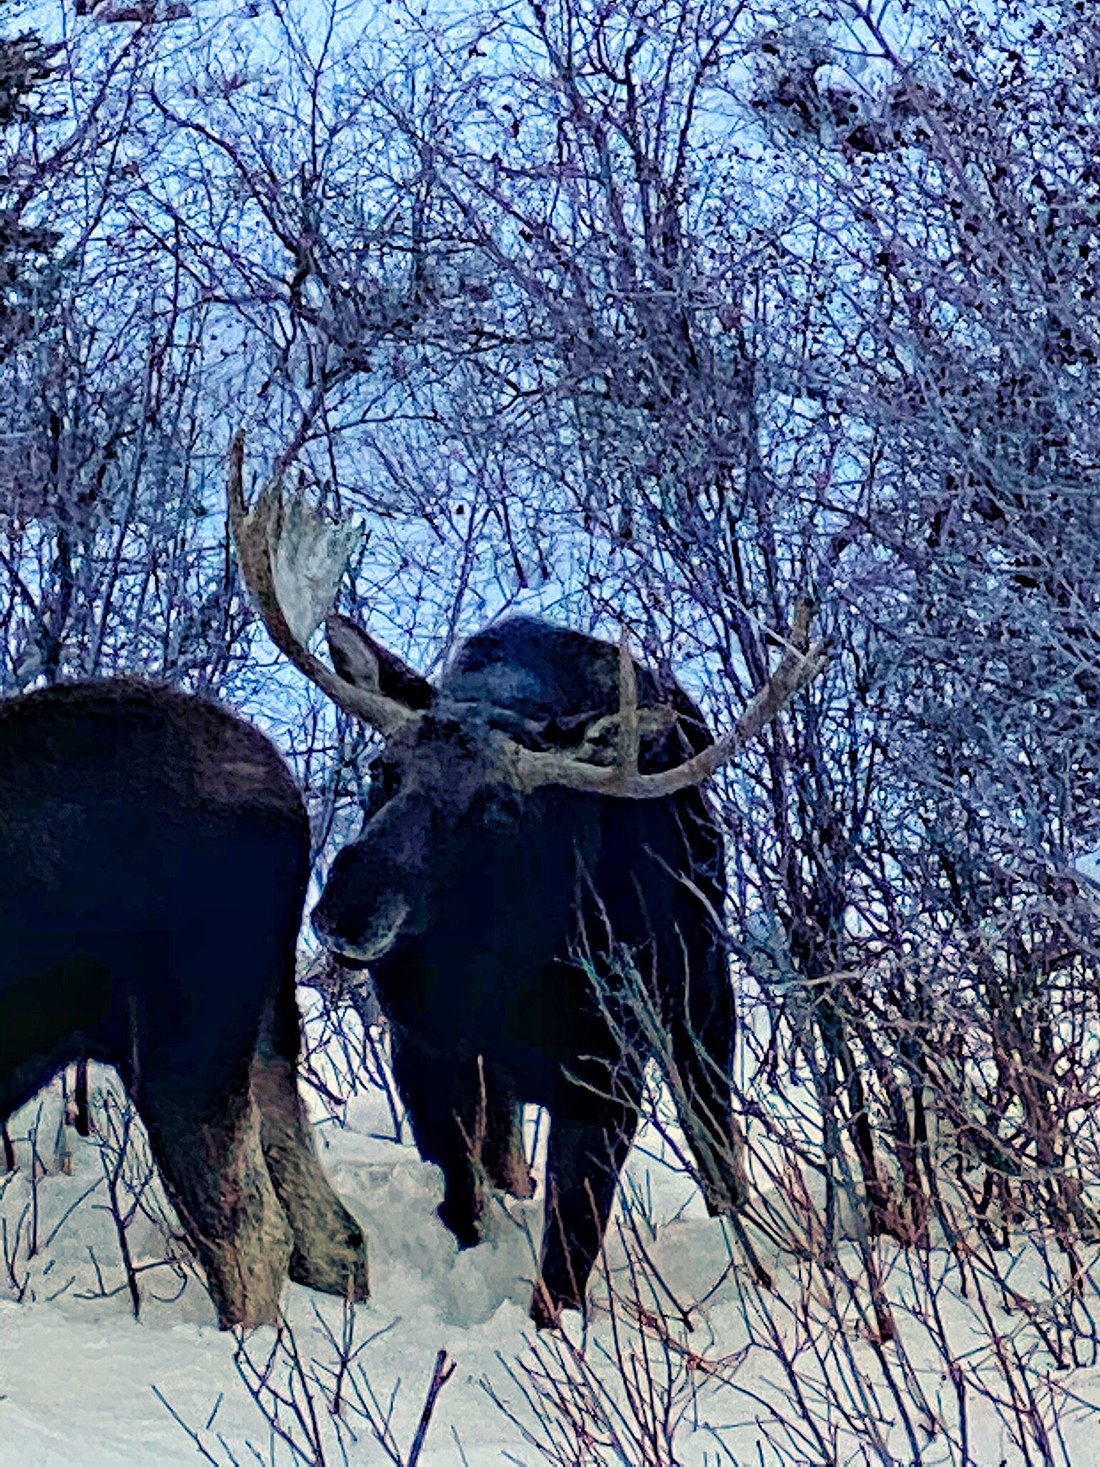 Up-Close moose in snowy tetons